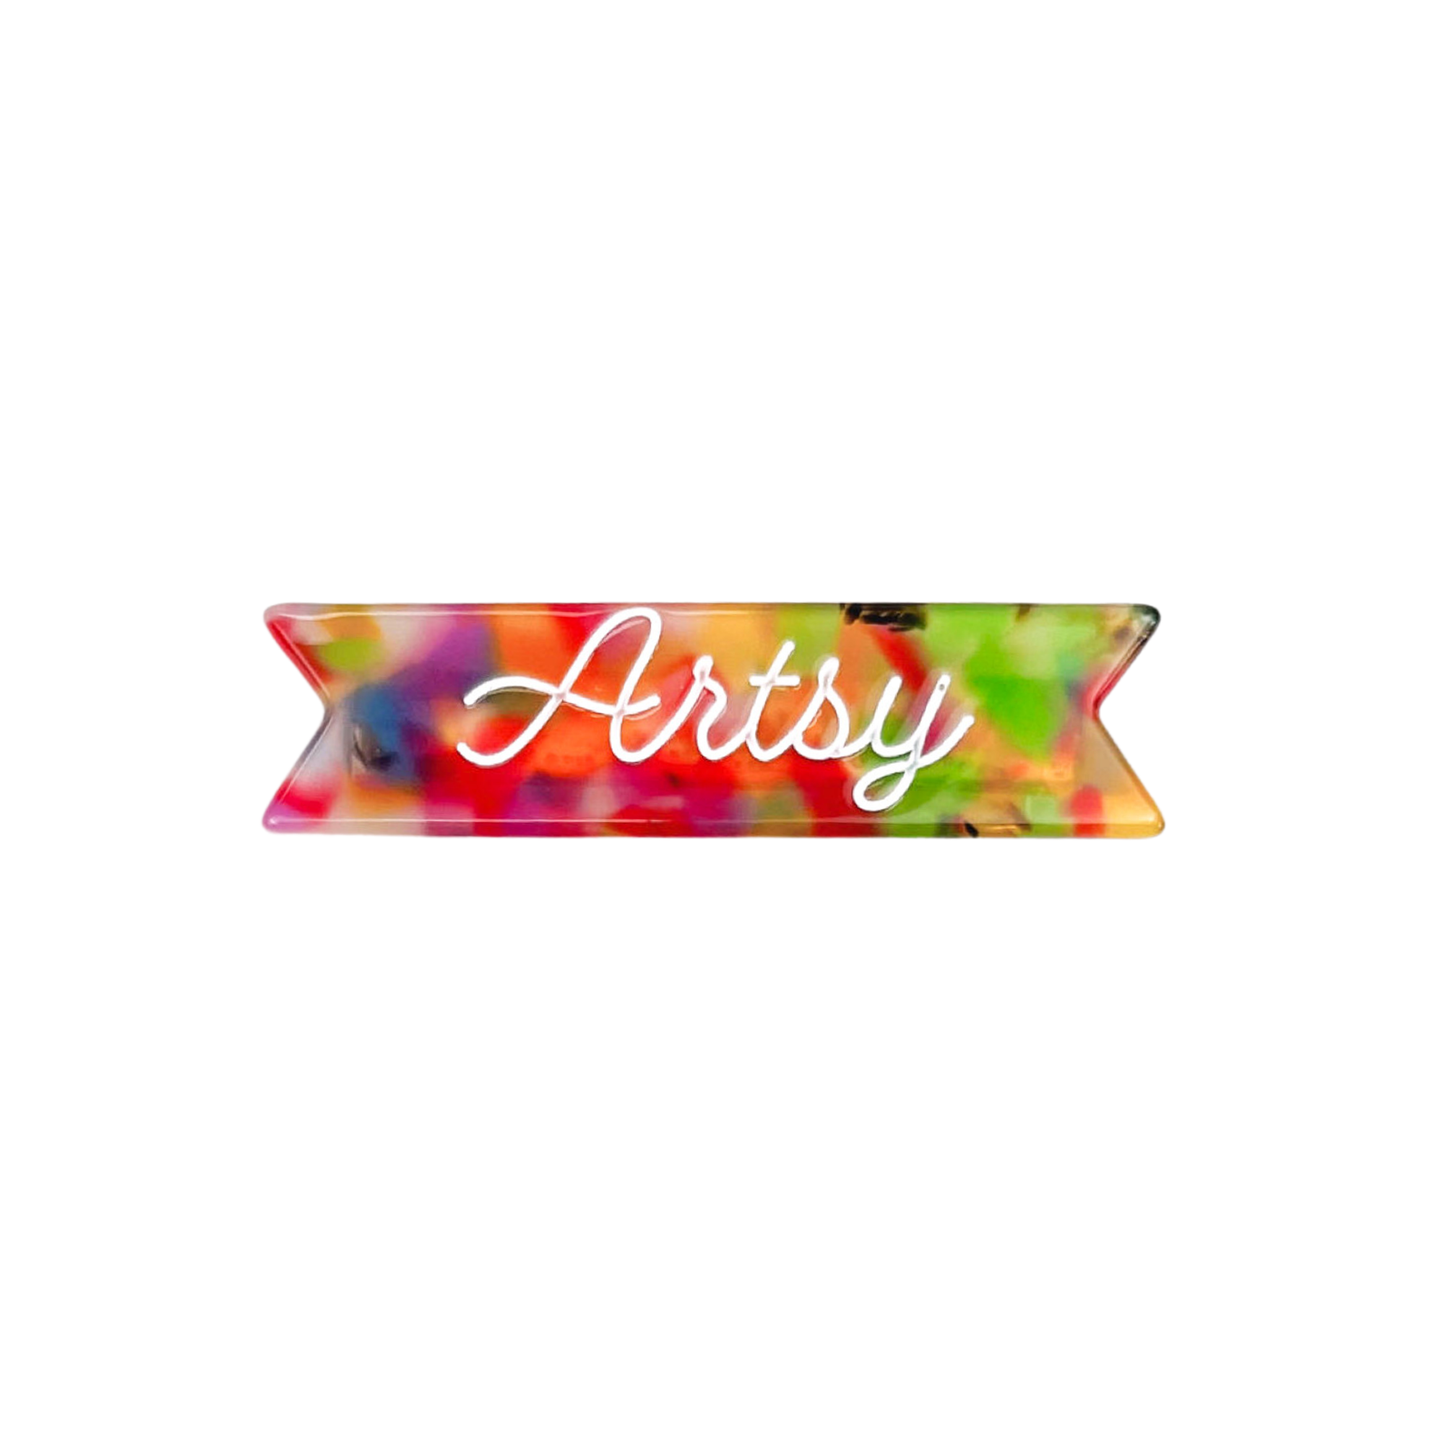 Artsy Hair Clip for Kids - Back to School Hair Accessories